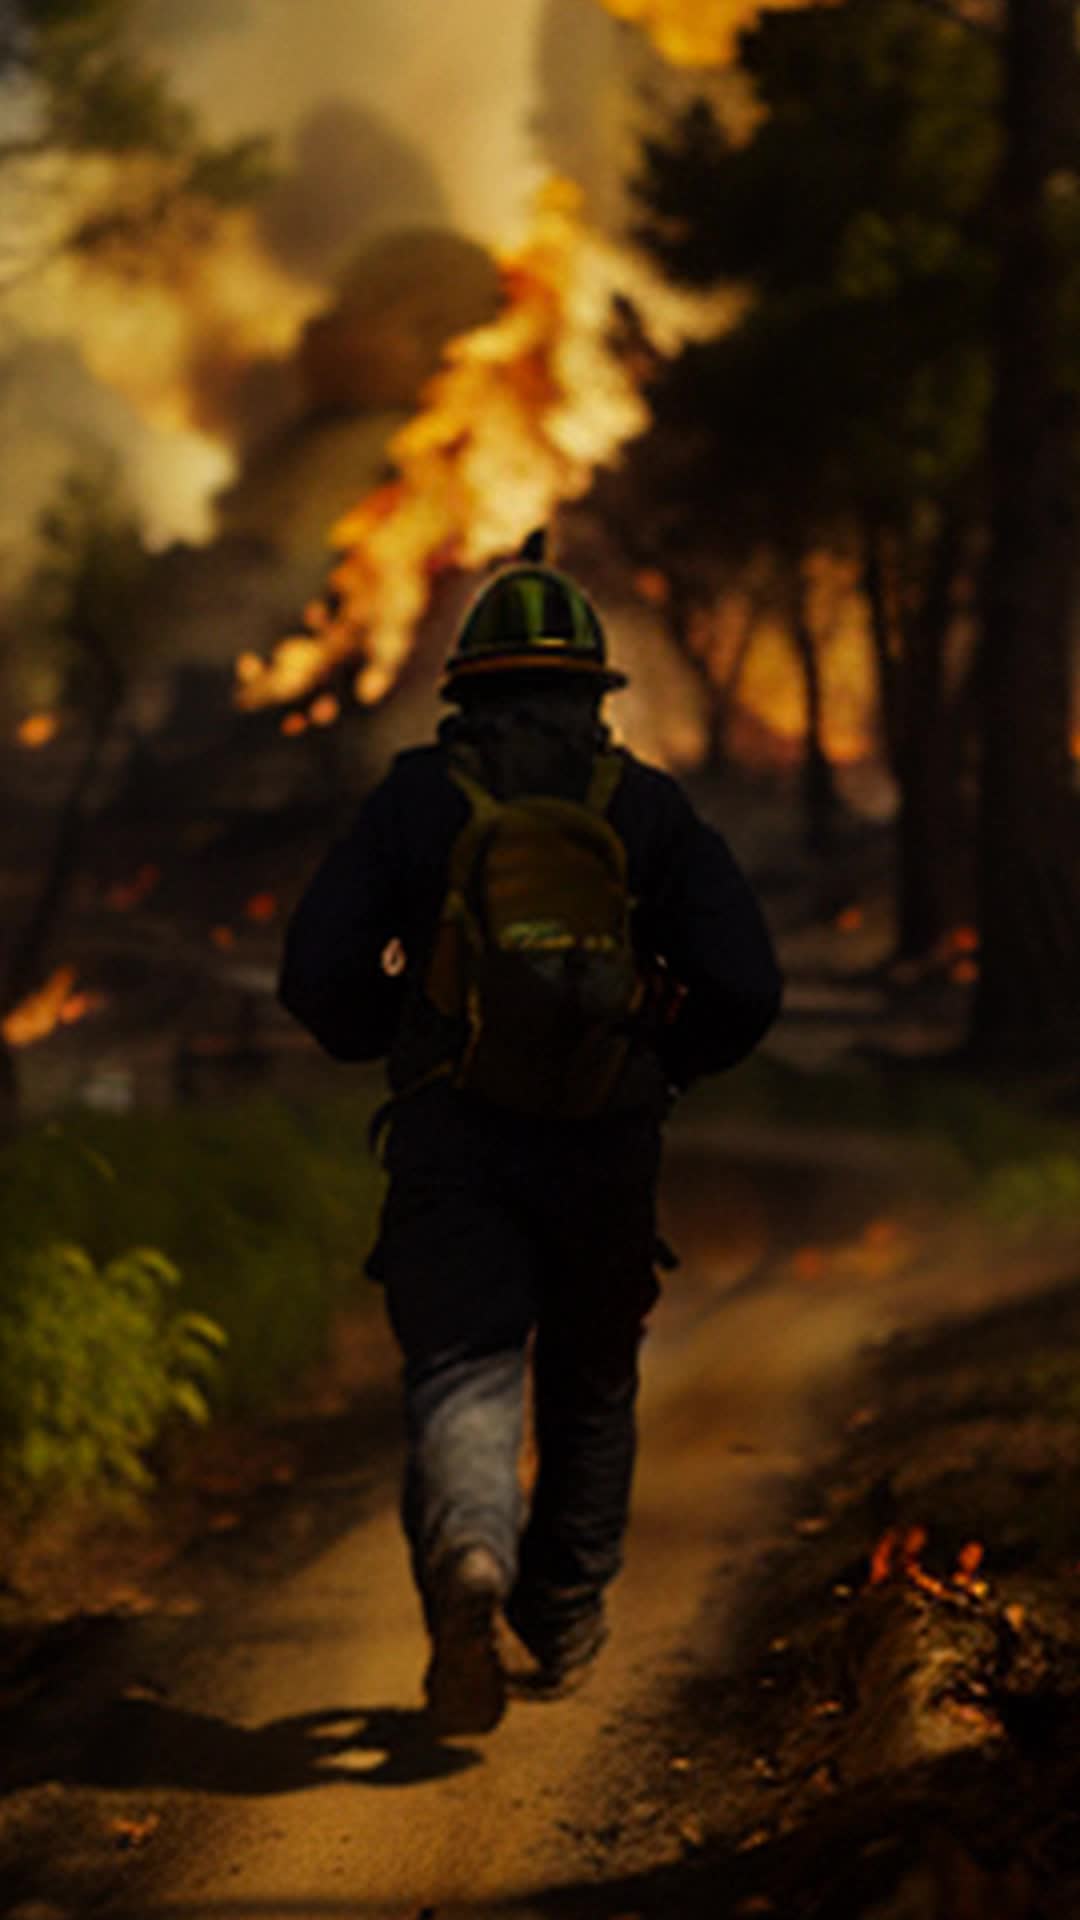 Biologist sprinting through forest fire, holding rare plant, research lab encircled by fire in background, desperate race, potential revolutionary fire retardant